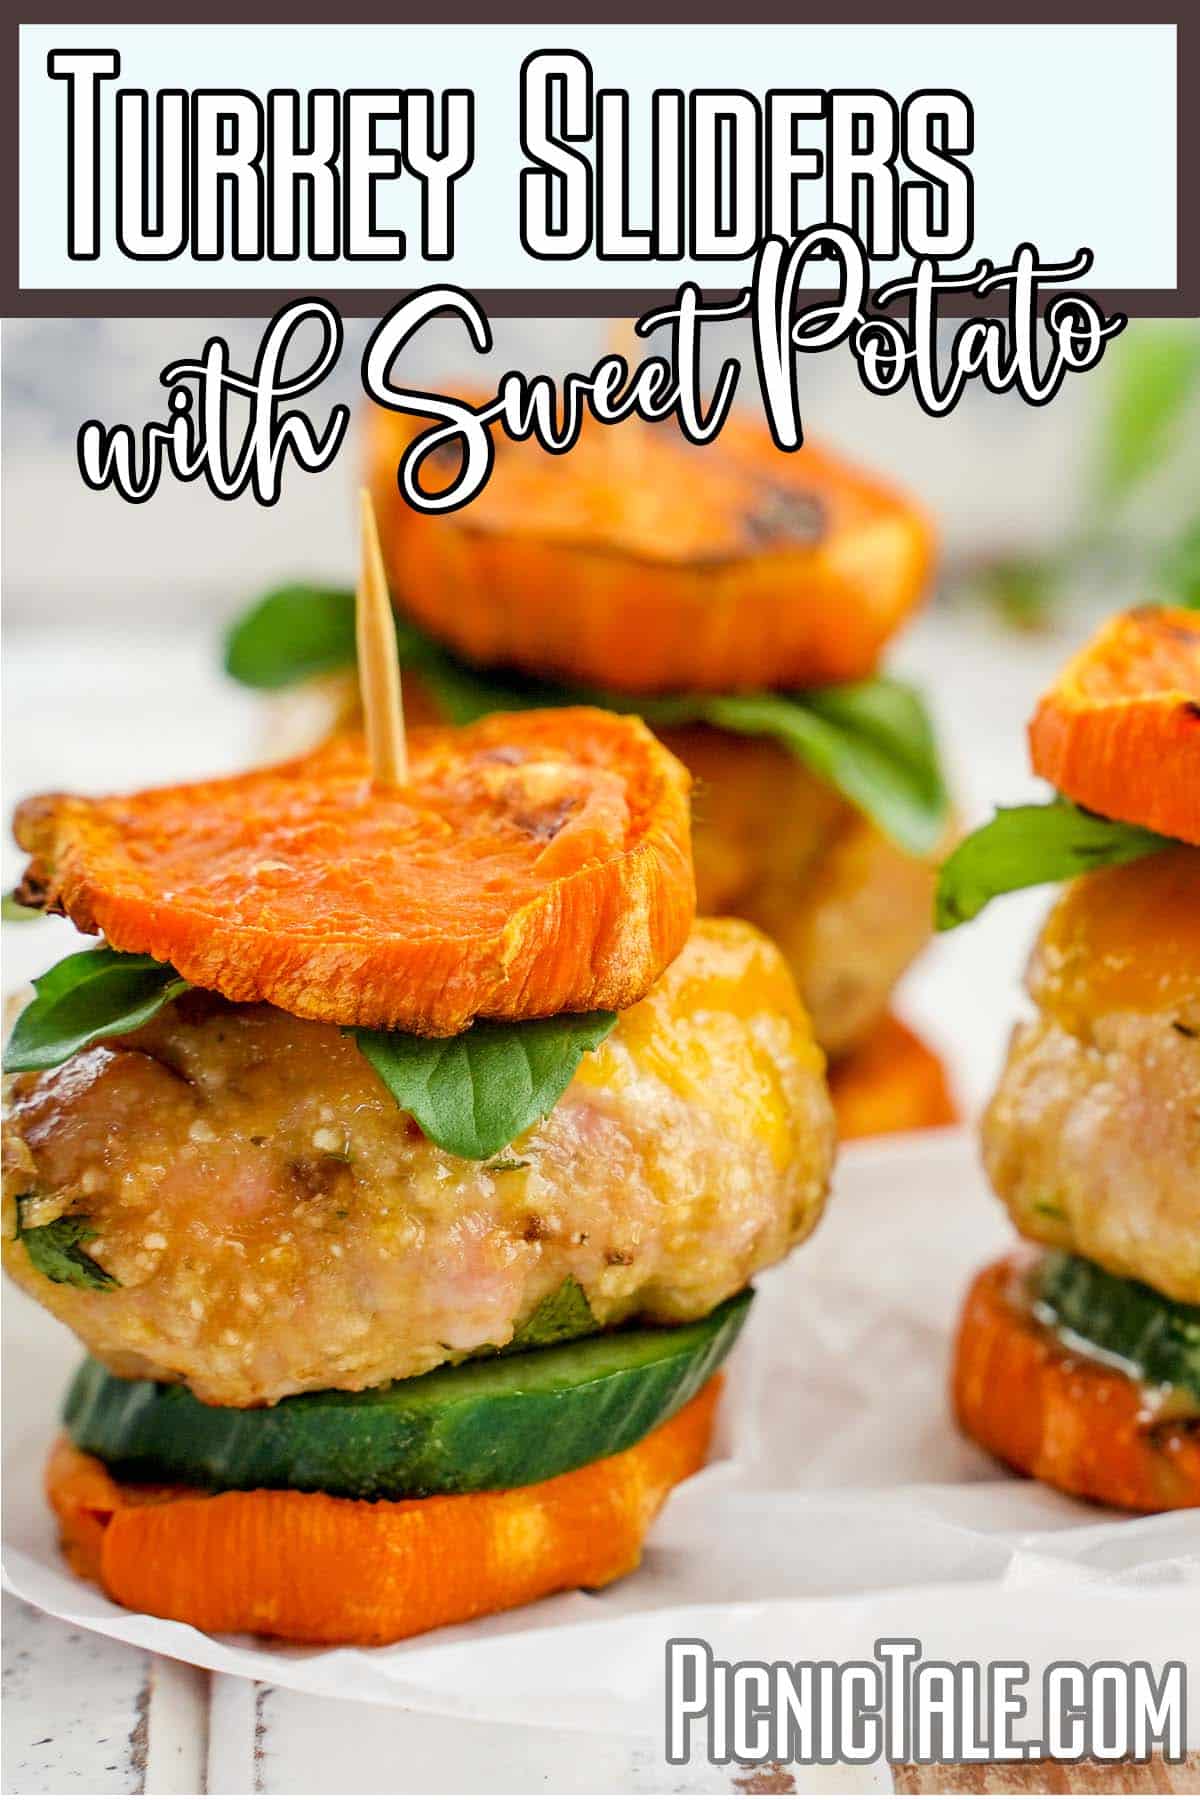 Turkey Sliders with Sweet Potato, lettering on top, Three stacks on white paper.